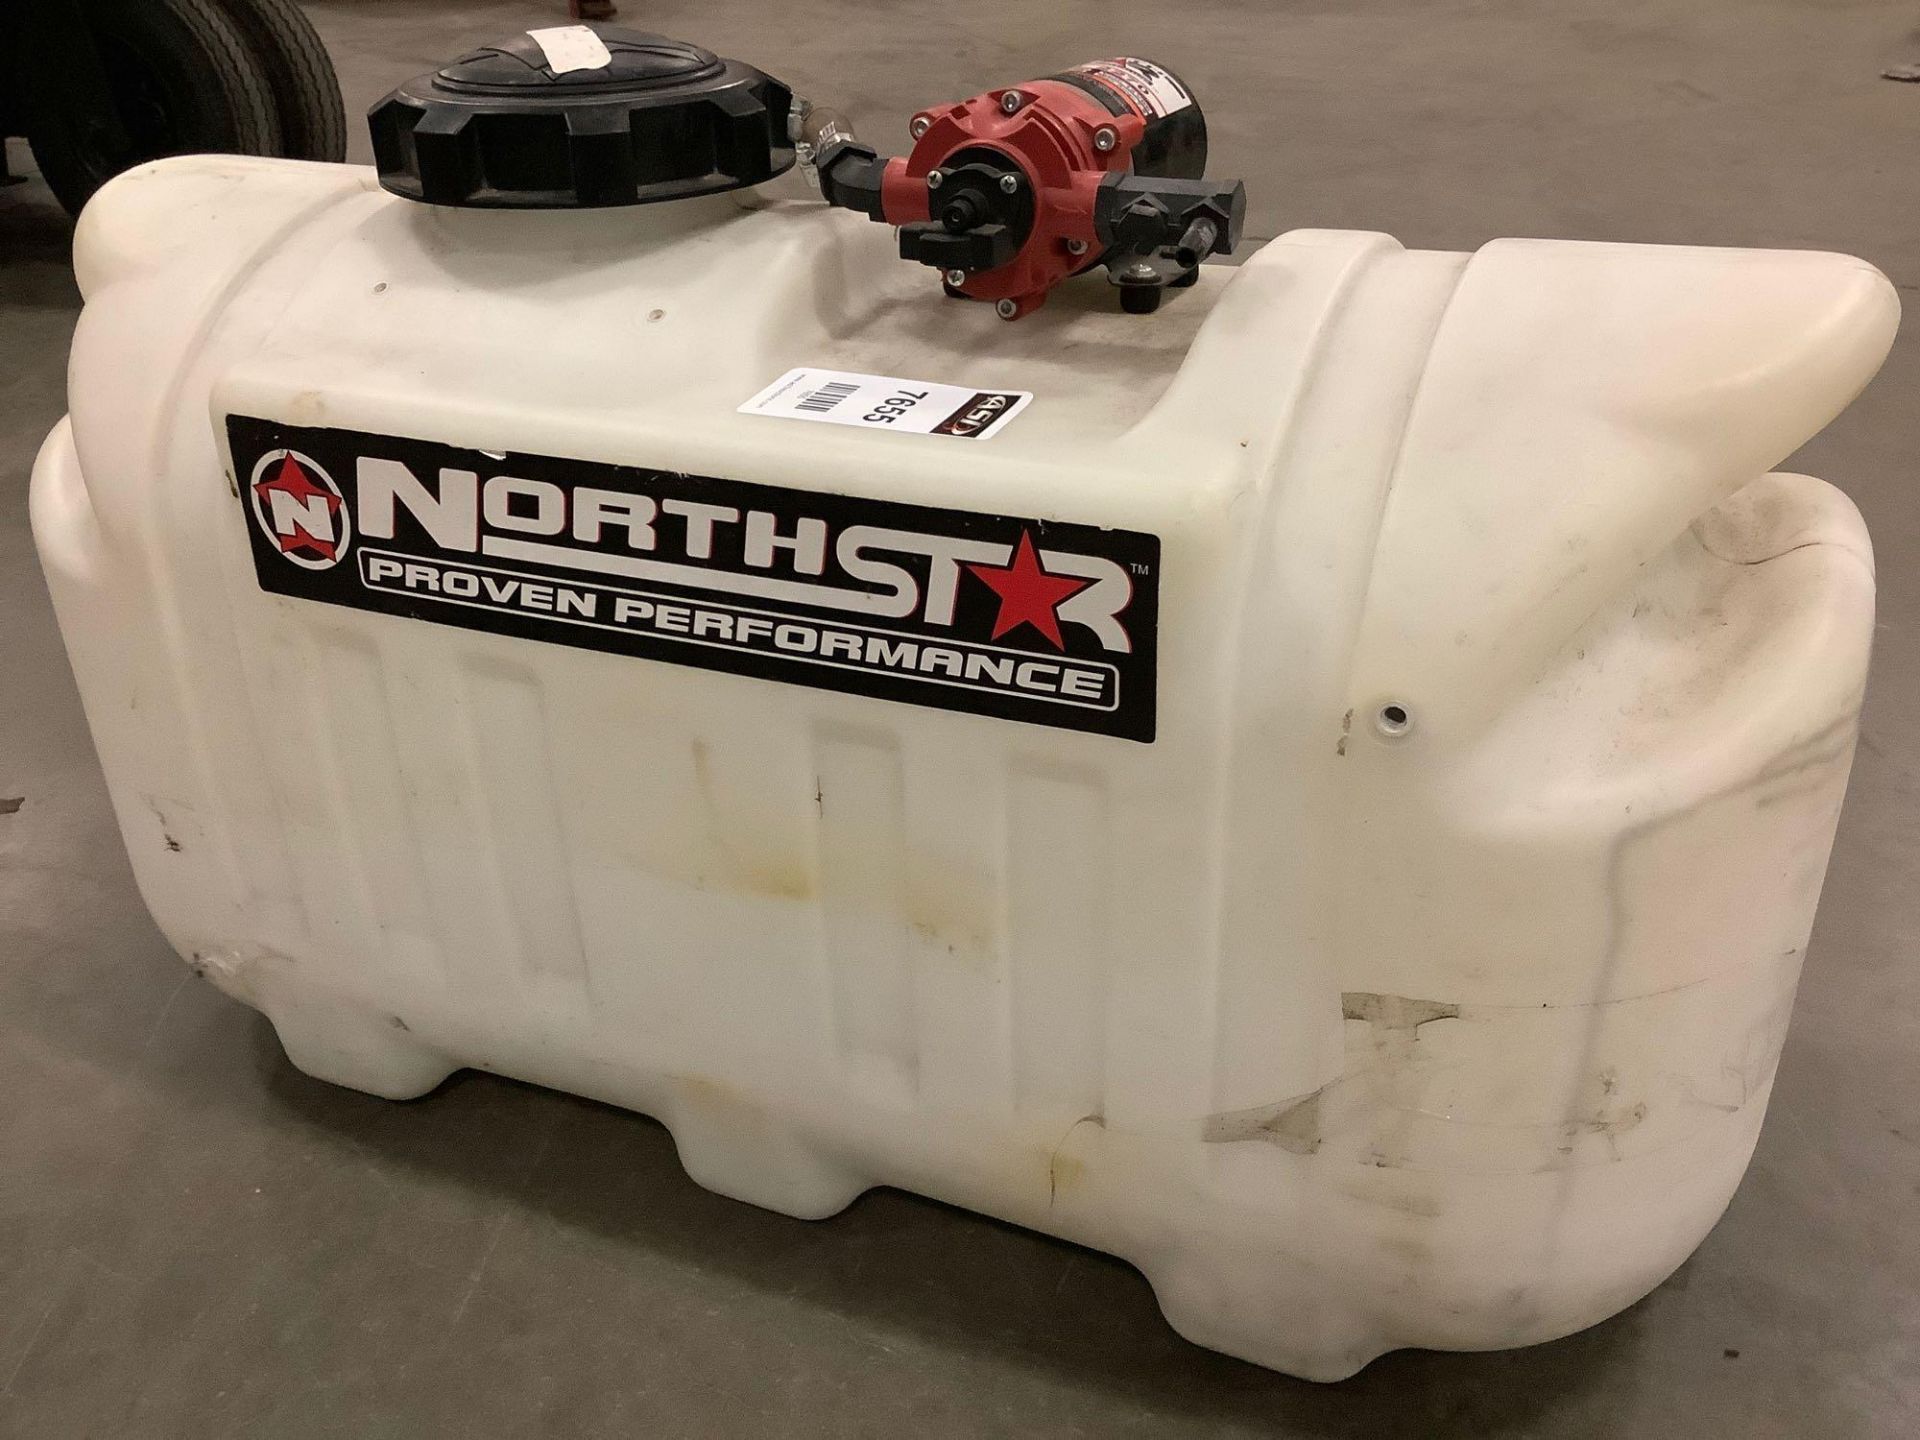 NORTHSTAR PROVEN PERFORMANCE SPRAYER MODEL 2270 WITH APPROX 24 GALLON CAPACITY, 12VDC VOLTS, APPROX